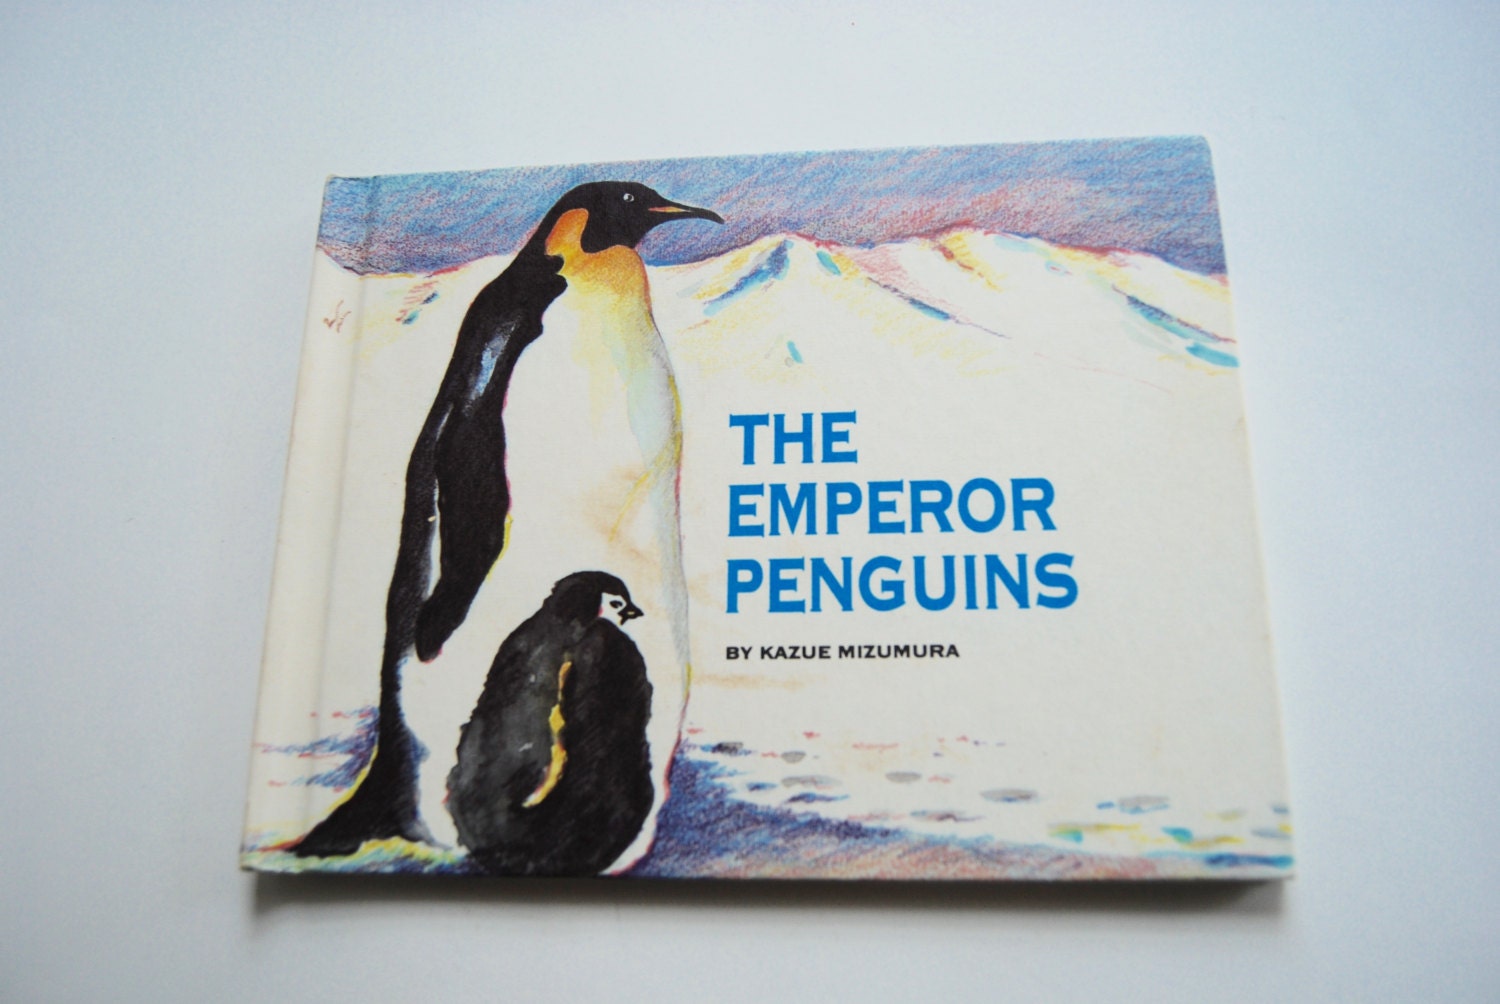 1969 Children's Hardcover Book, the Emperor Penguins, Kazue Mizumura,  Science, Non Fiction, Zoology, Ornithology, Illustrated, Collectable 